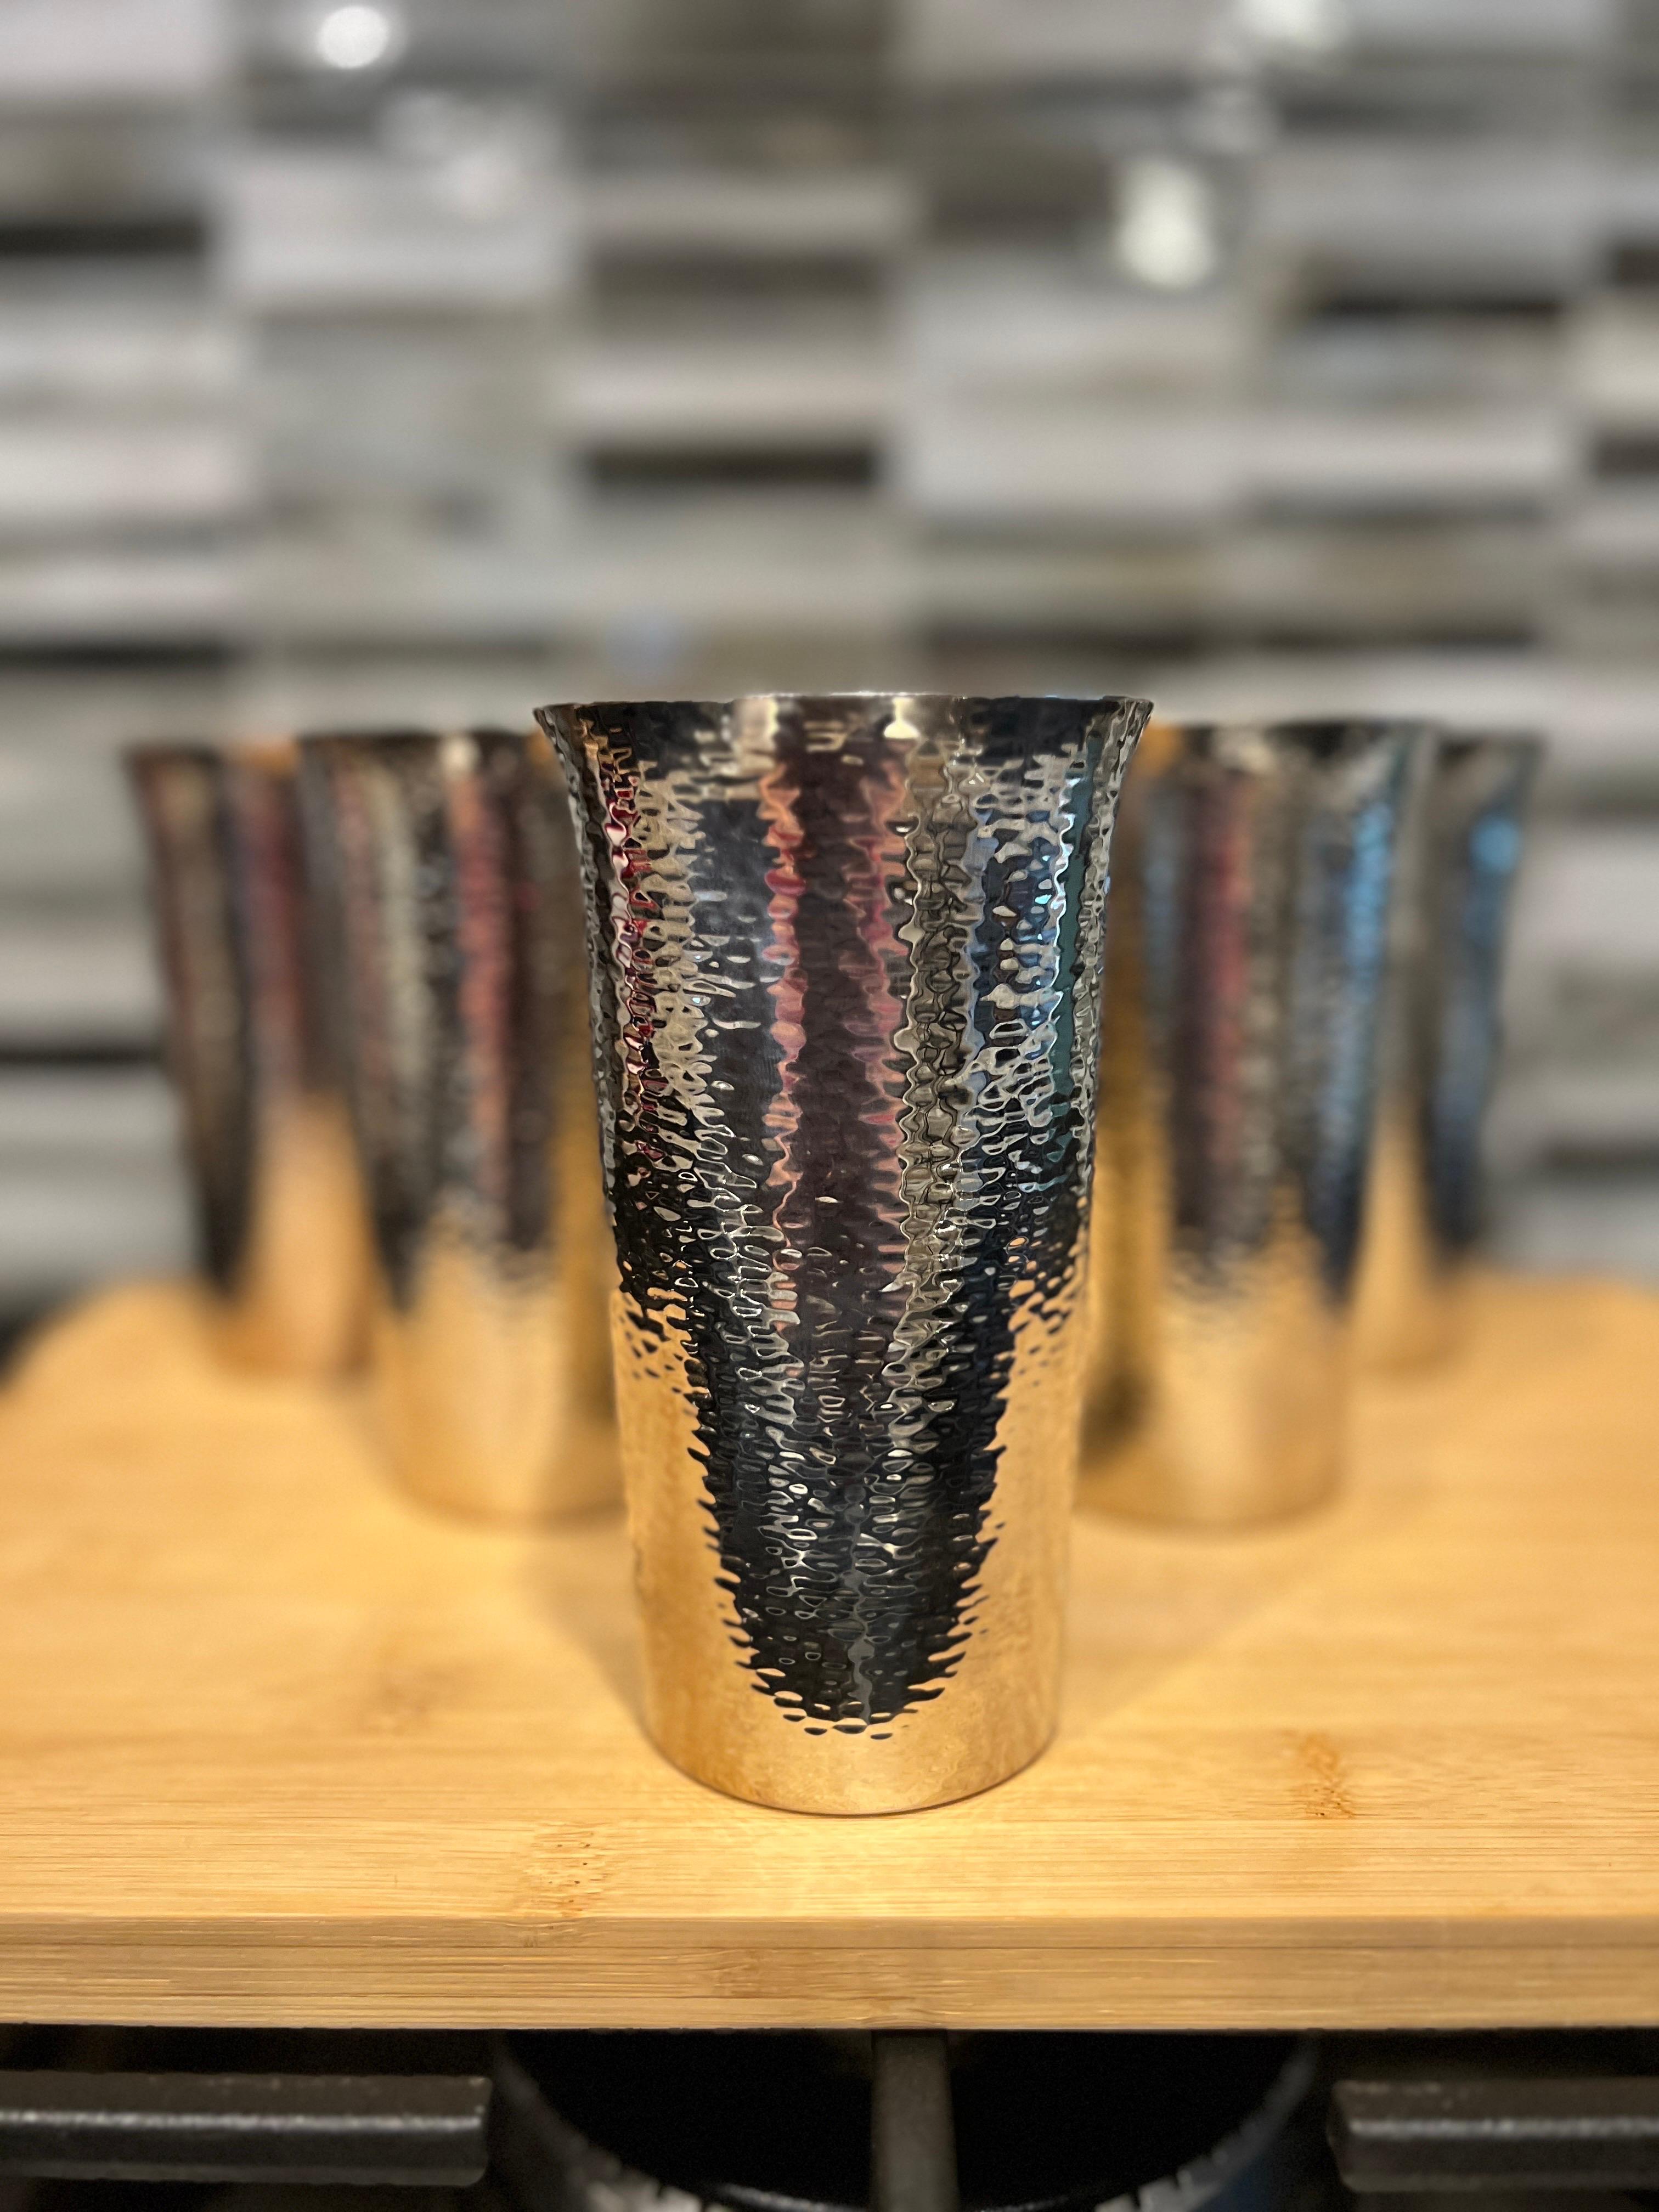 American, 20th century.

A great grouping of 6 American silver plated tumblers or iced tea glasses. Each piece is beautifully hand hammered to give a fantastic surface feel and appearance. Marked appropriately to underside. 